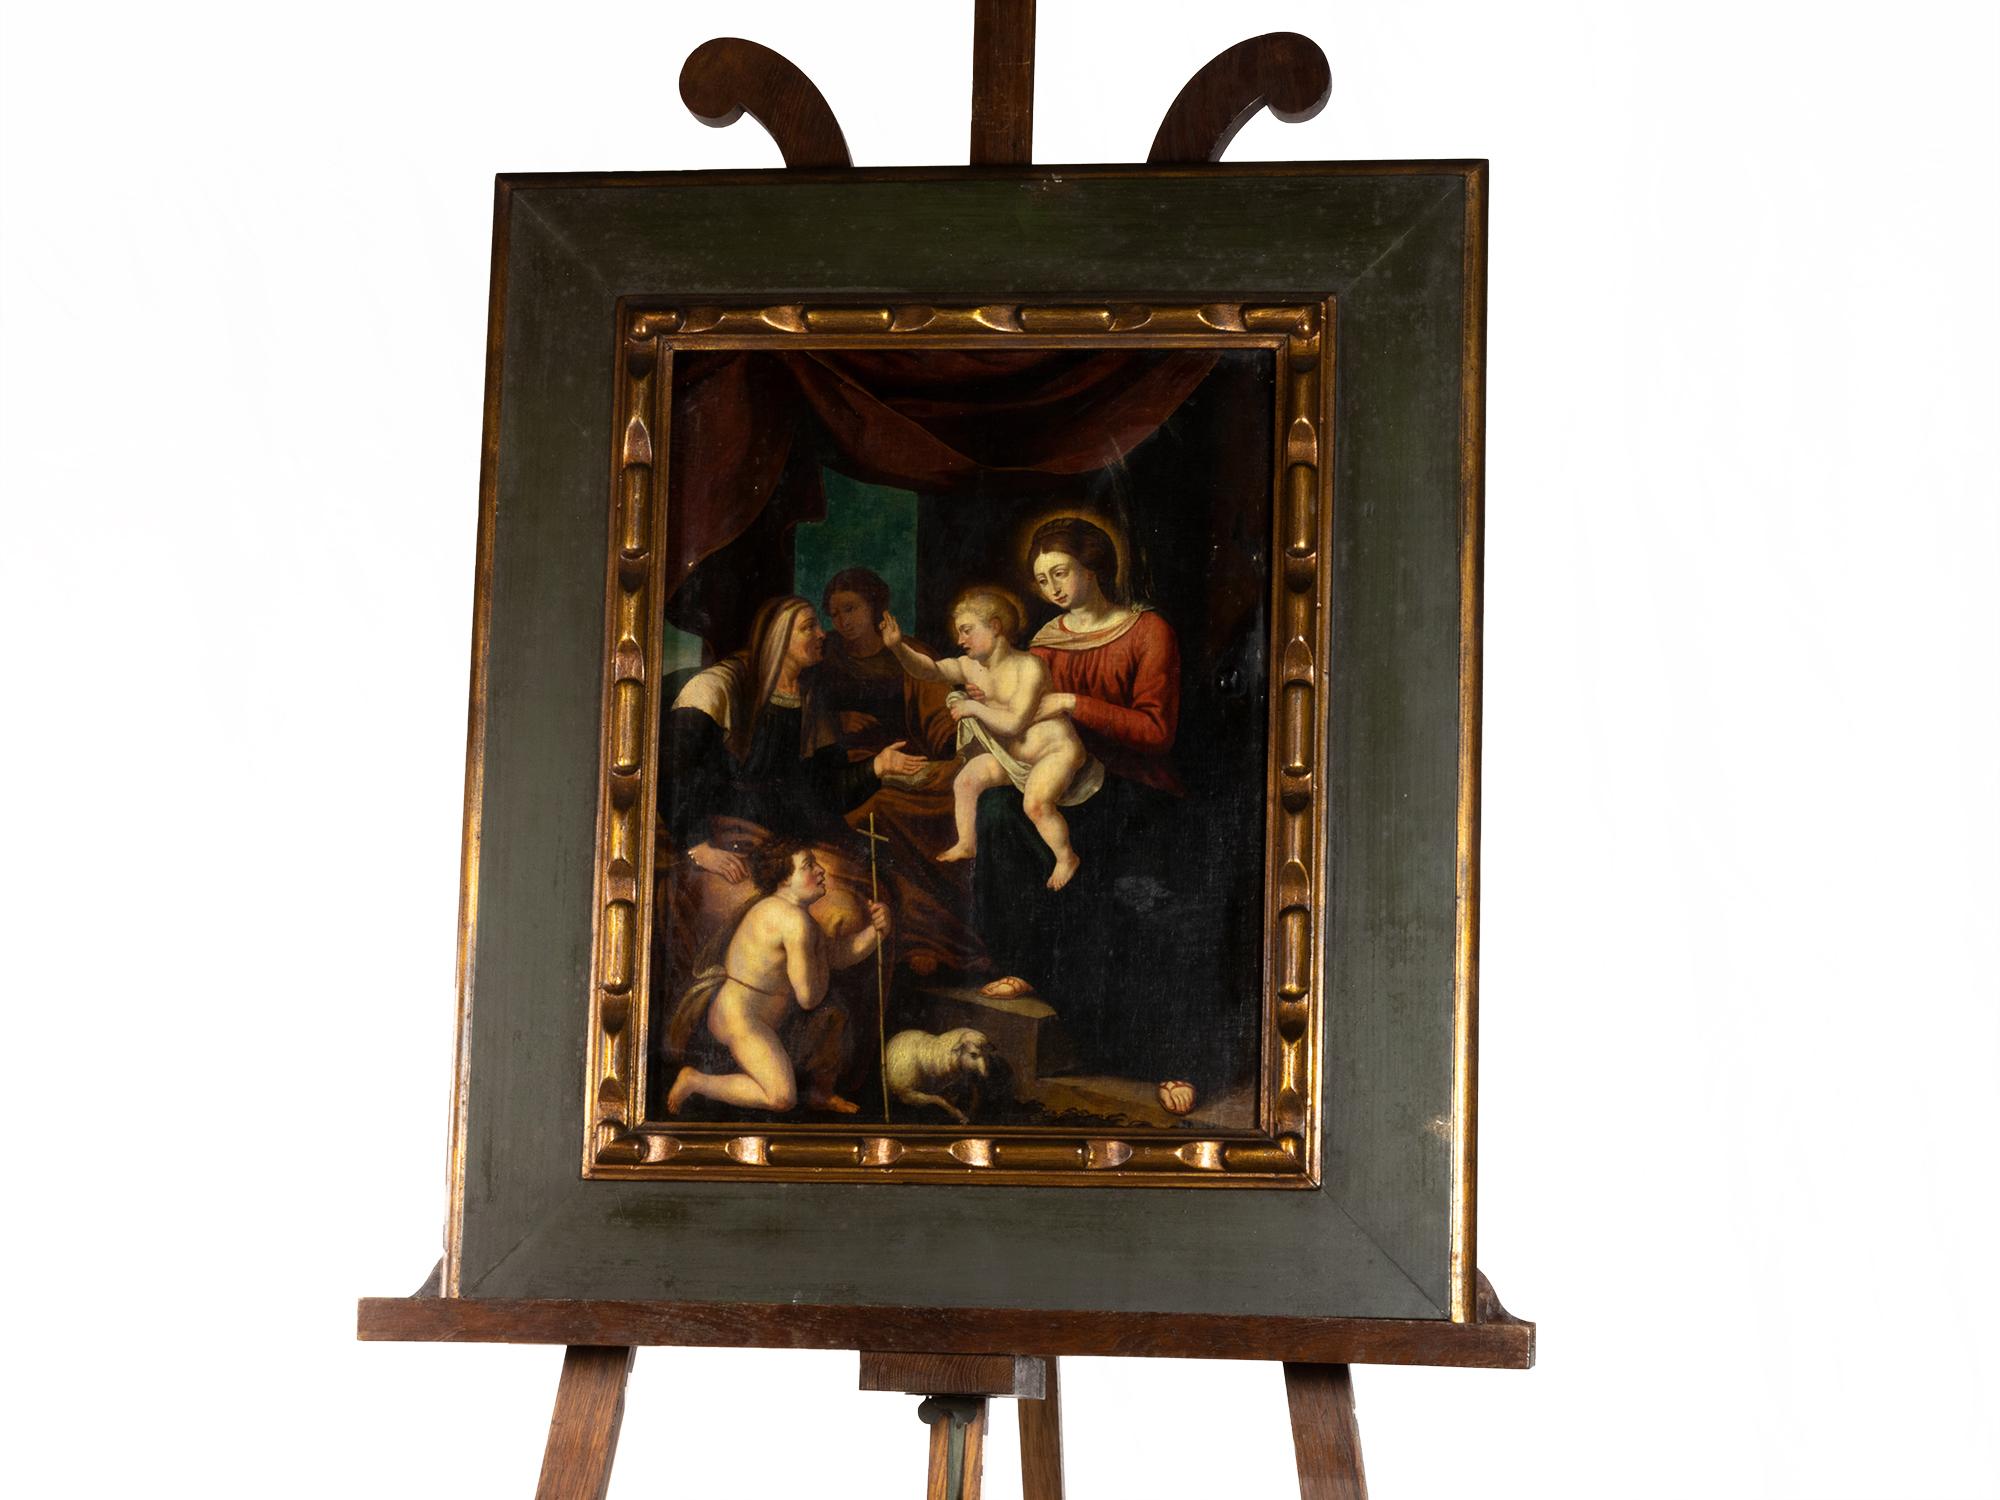 A Flemish School painting of the Adoration of the Child Jesus in the hands of Mary and a young Saint John the Baptist at his feet kneeling with the cross side by side with a resting lamb of God. 

Frame 63 x 73 cm 
Without frame: 41 x 55 cm

Matthew